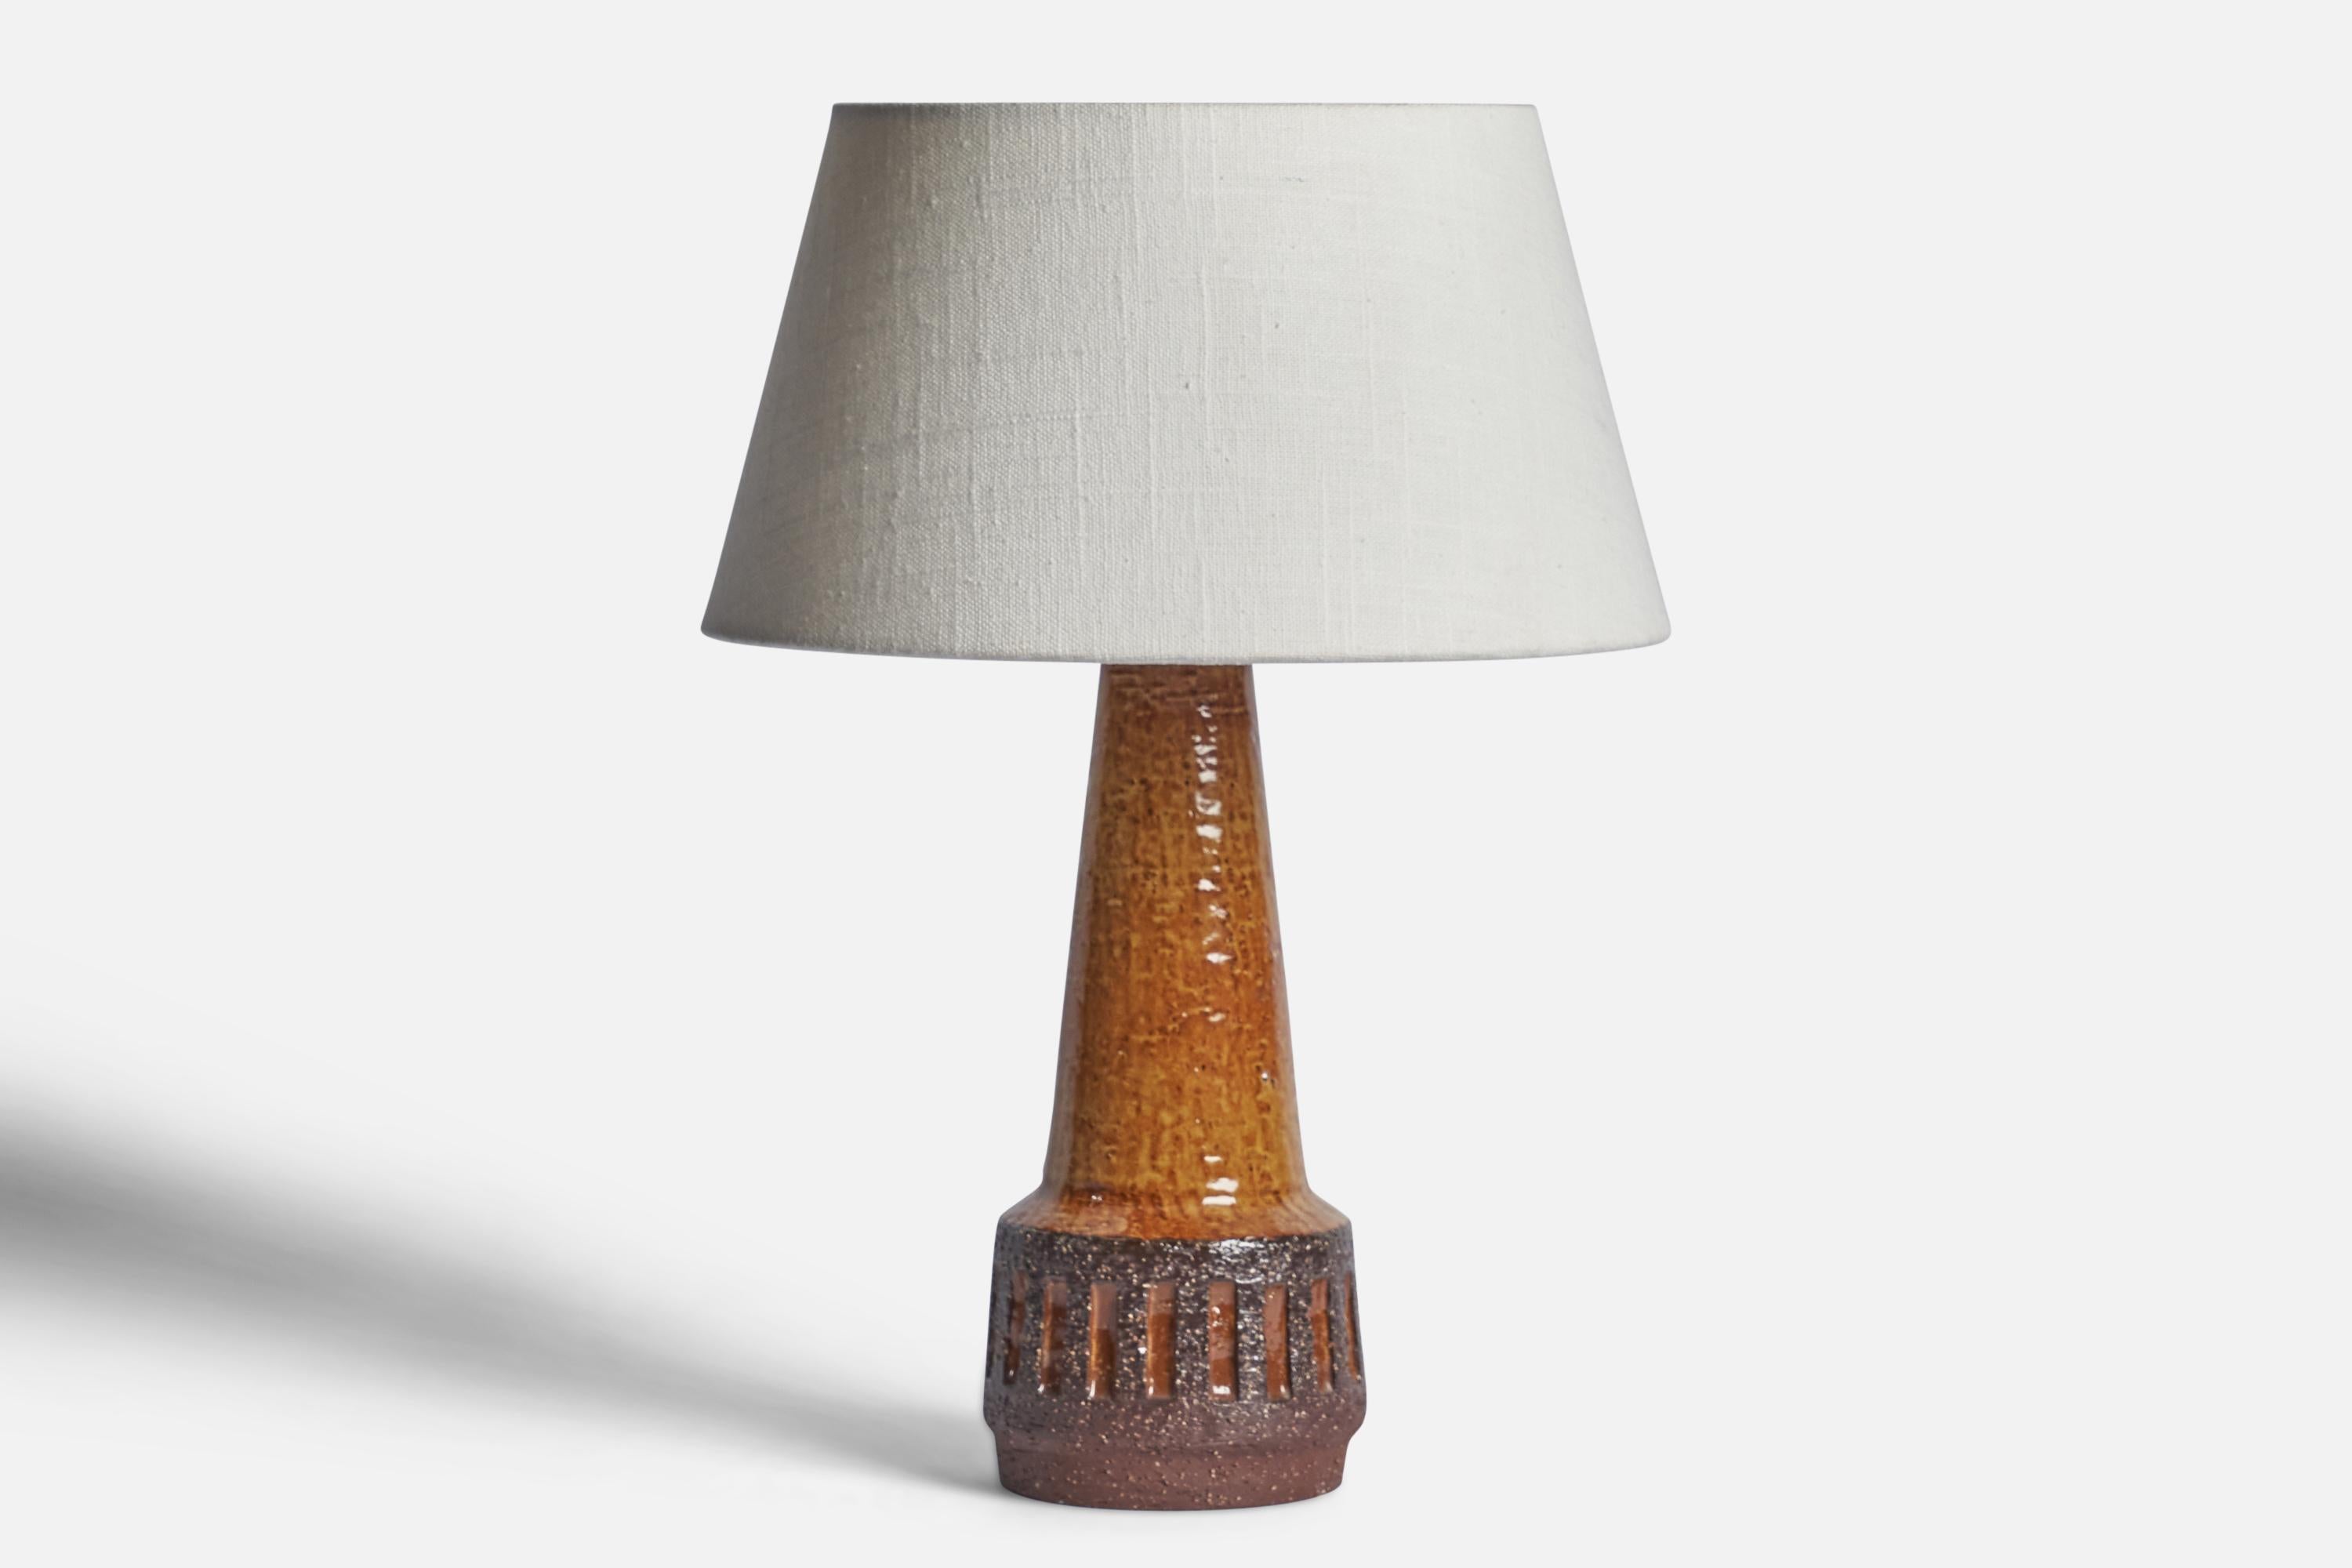 A brown-glazed stoneware table lamp designed and produced by Michael Andersen, Bornholm, Denmark, 1960s.

Dimensions of Lamp (inches): 11” H x 4.25